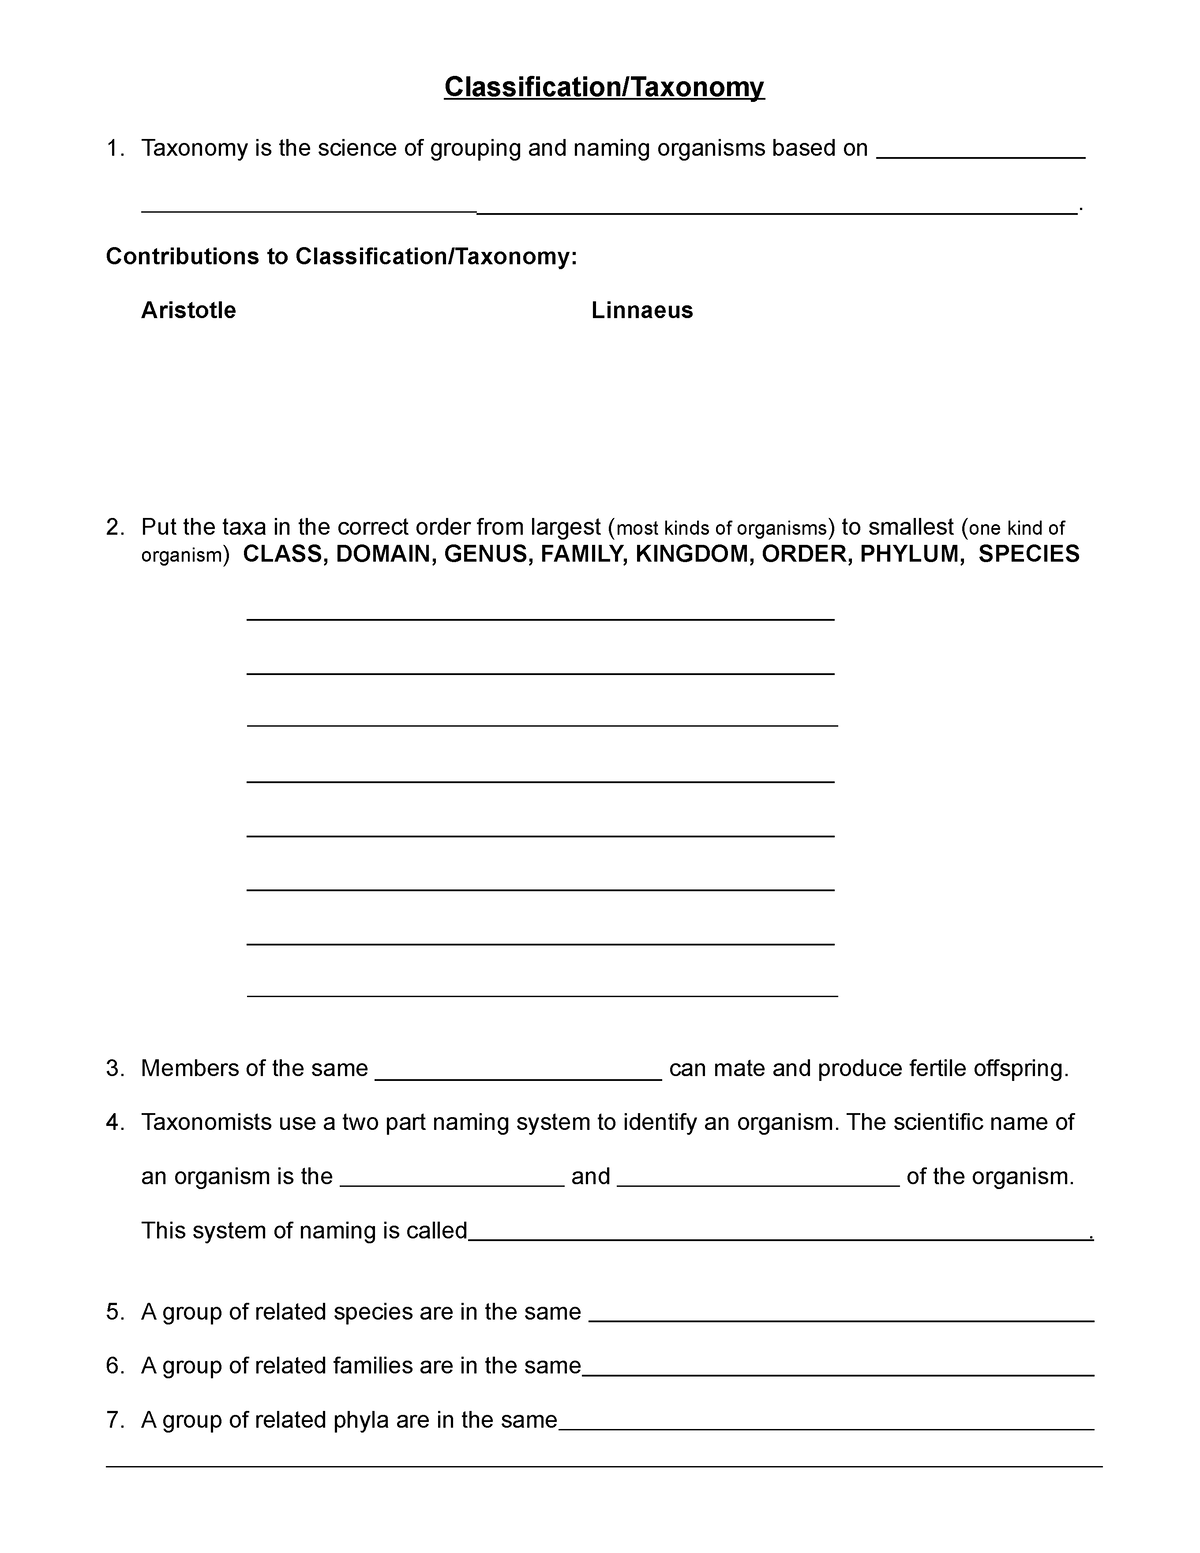 classification-notes-worksheet-1-classification-taxonomy-taxonomy-is-the-science-of-grouping